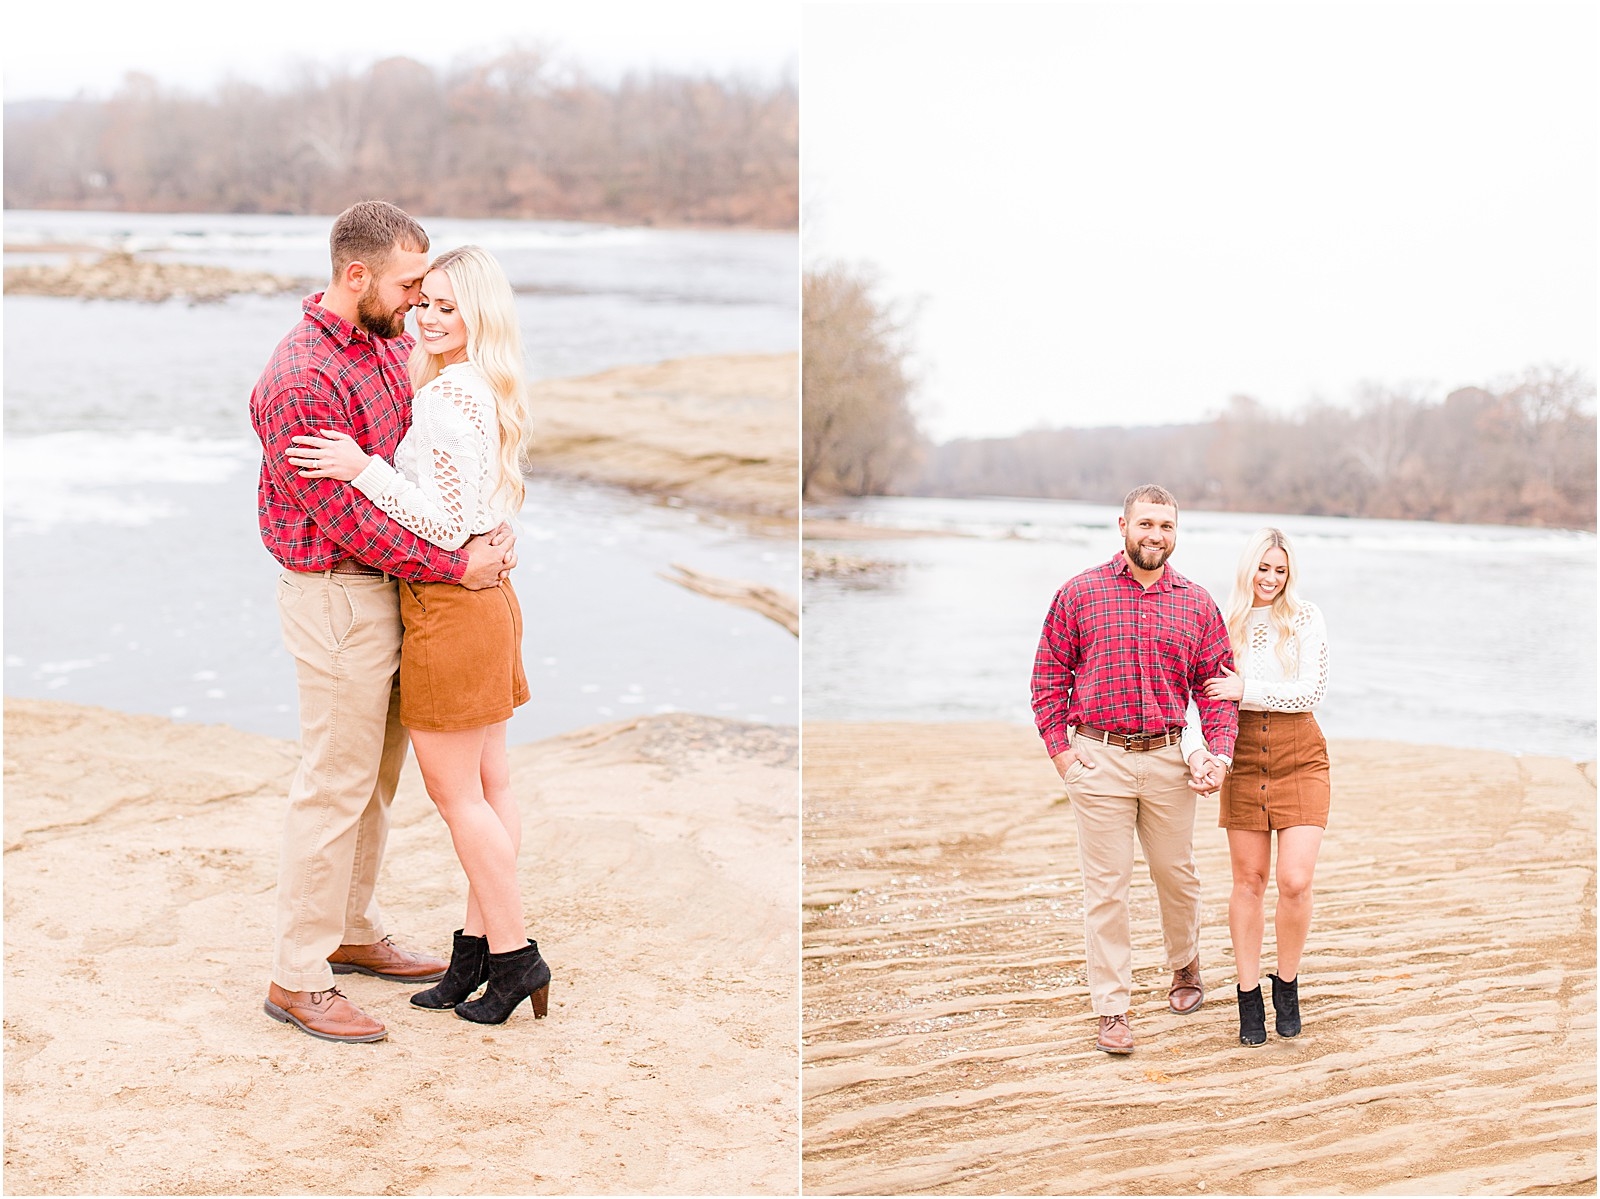 An sweet and snuggly fall anniversary session in Loogootee, Indiana. | #anniversarysession #fallsession #southernindianawedding | 012.jpg